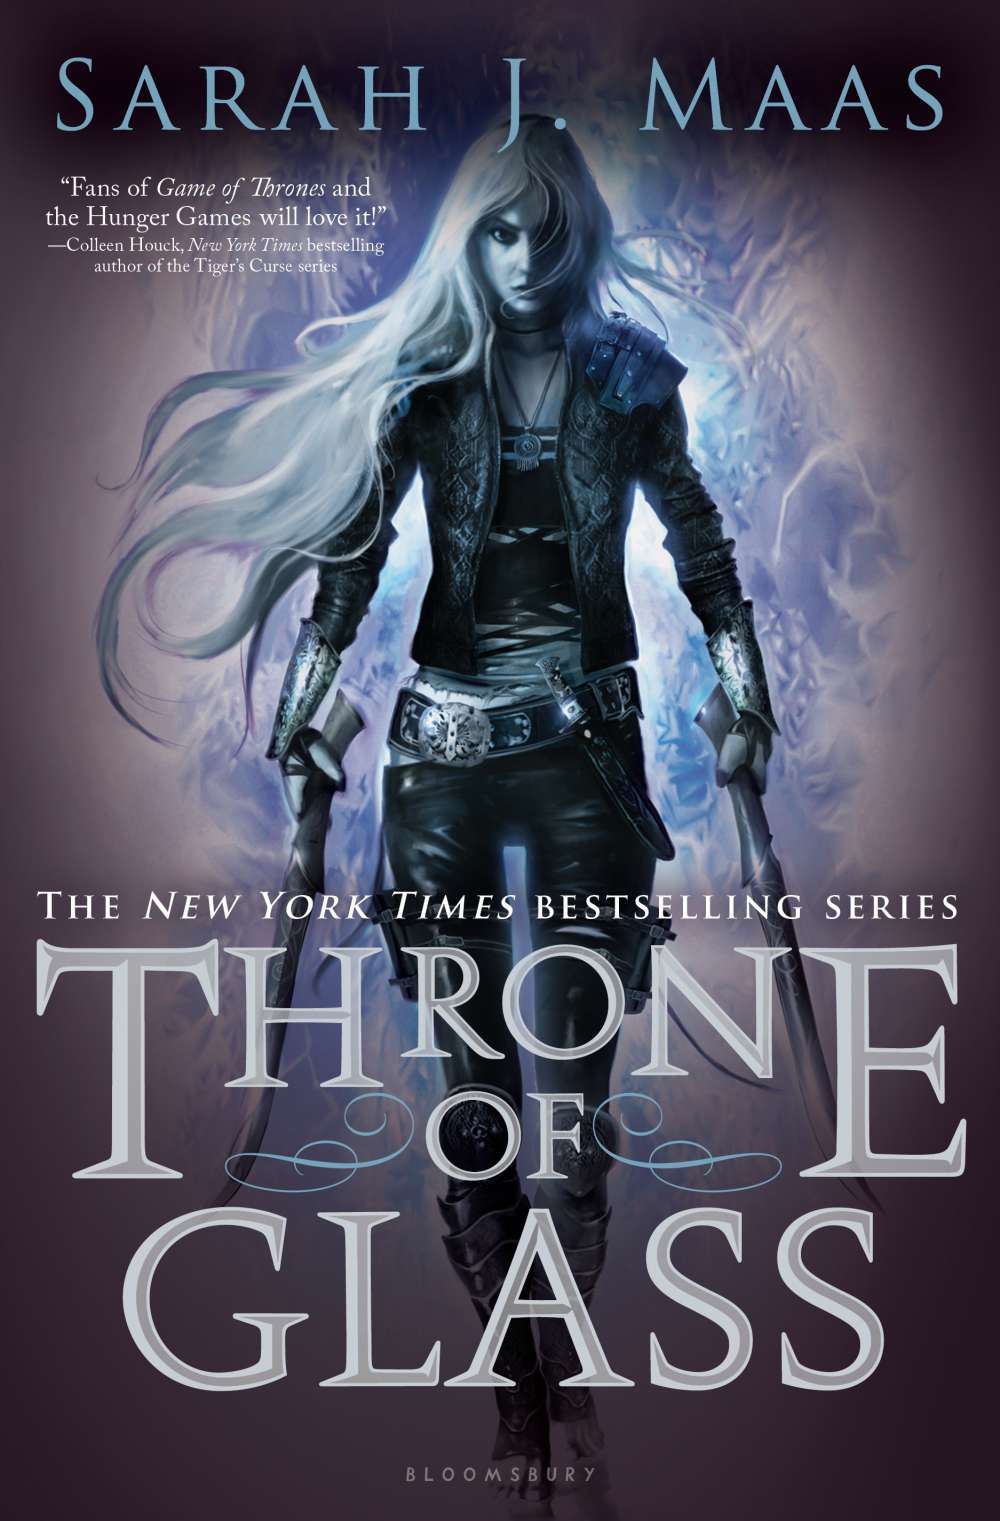 The Throne of Glass series by Sarah J. Maas